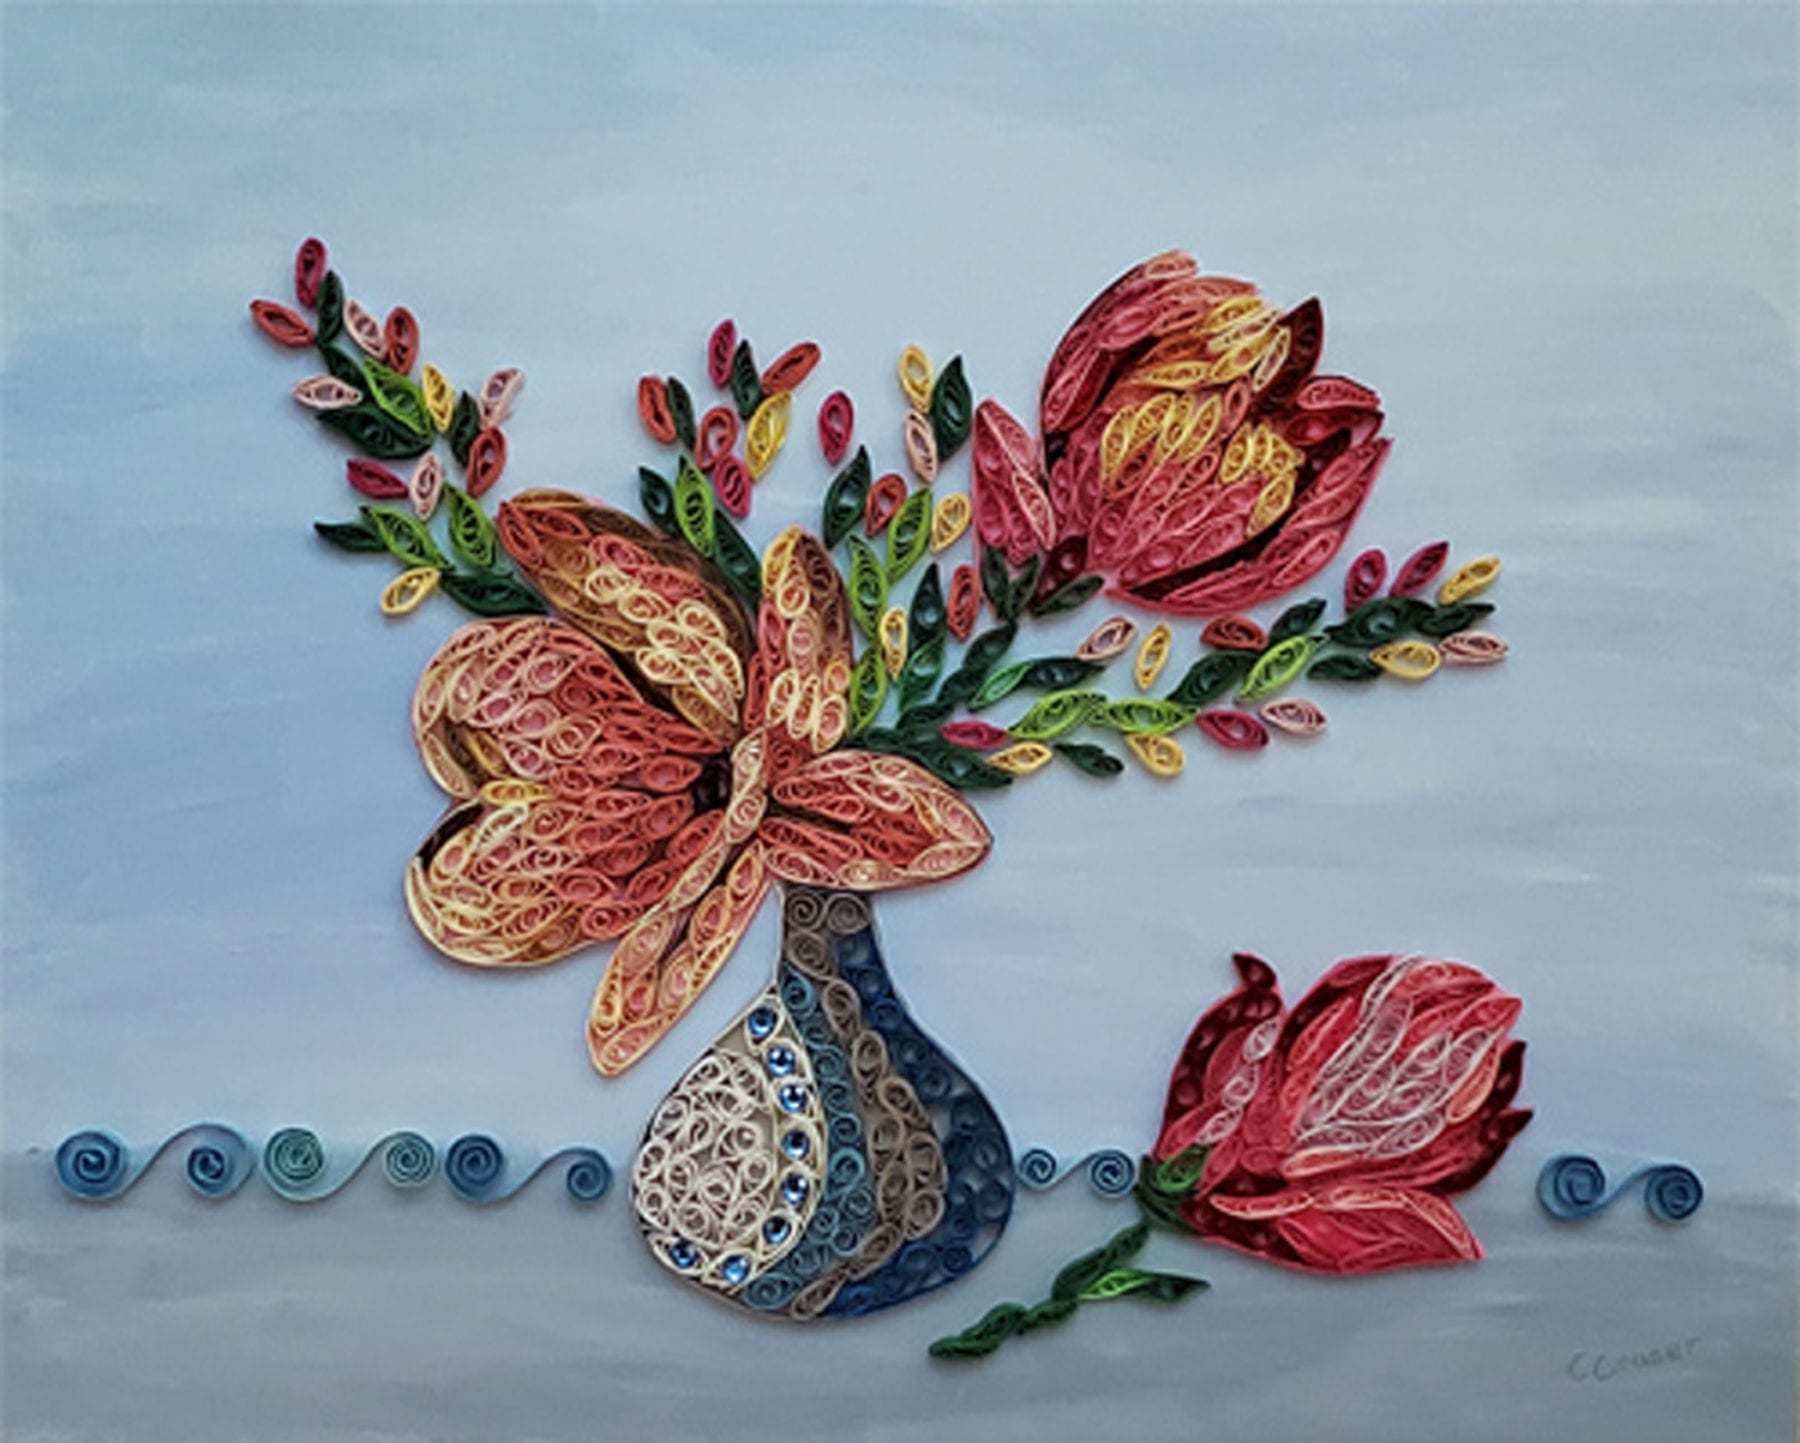 Connie Cruser, Floral Embrace, mixed media (paper quilled artwork), 21 x 17 inches